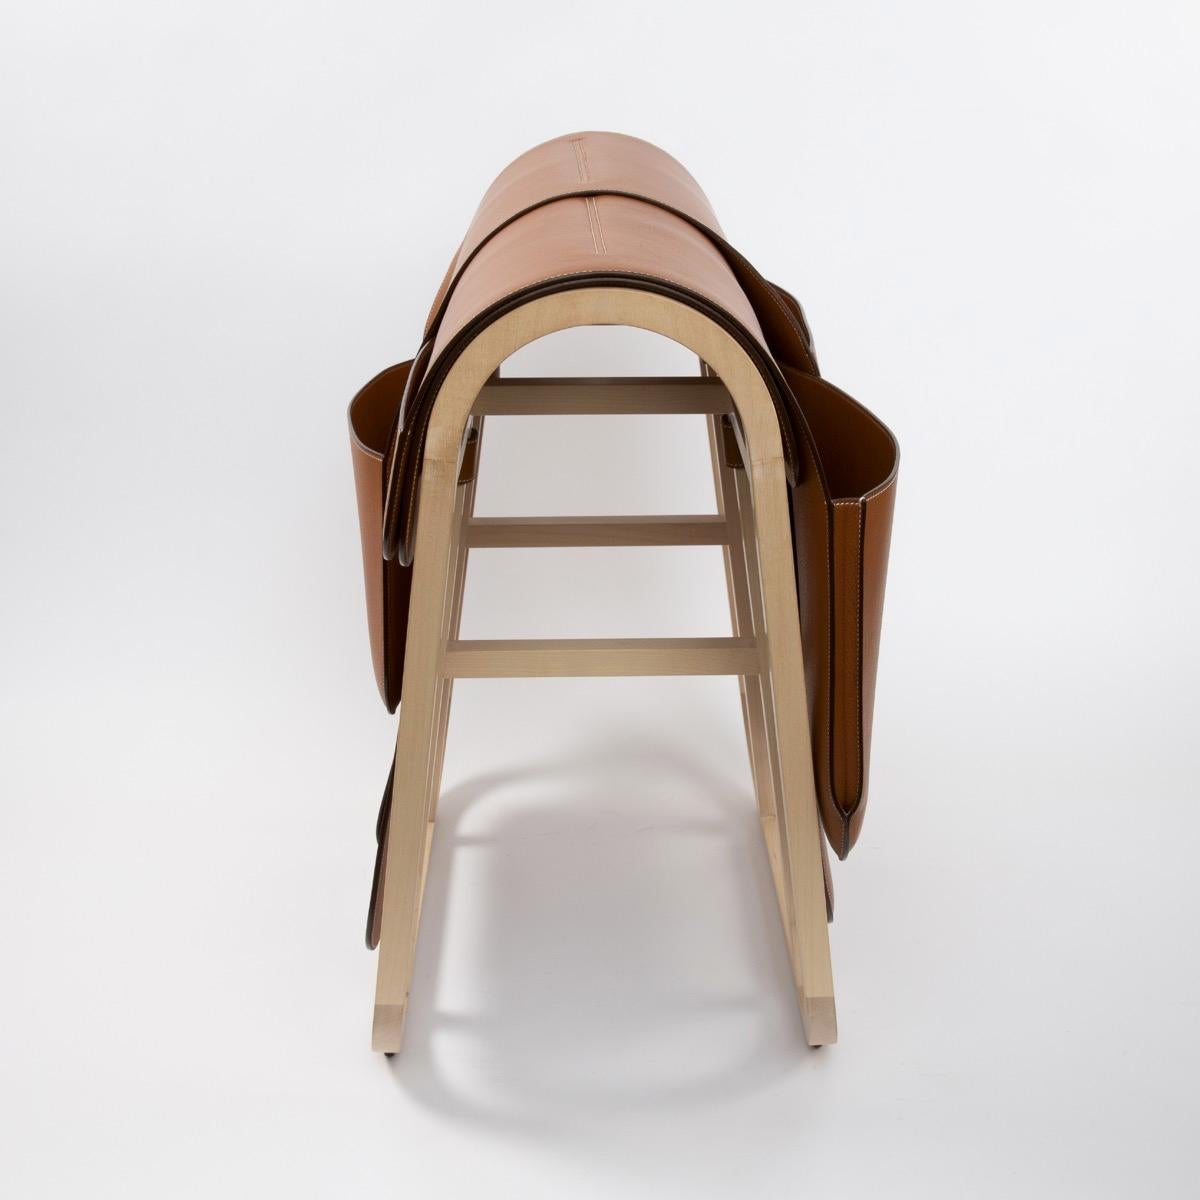 French Hermès Paris, a Magazine Rack from the 